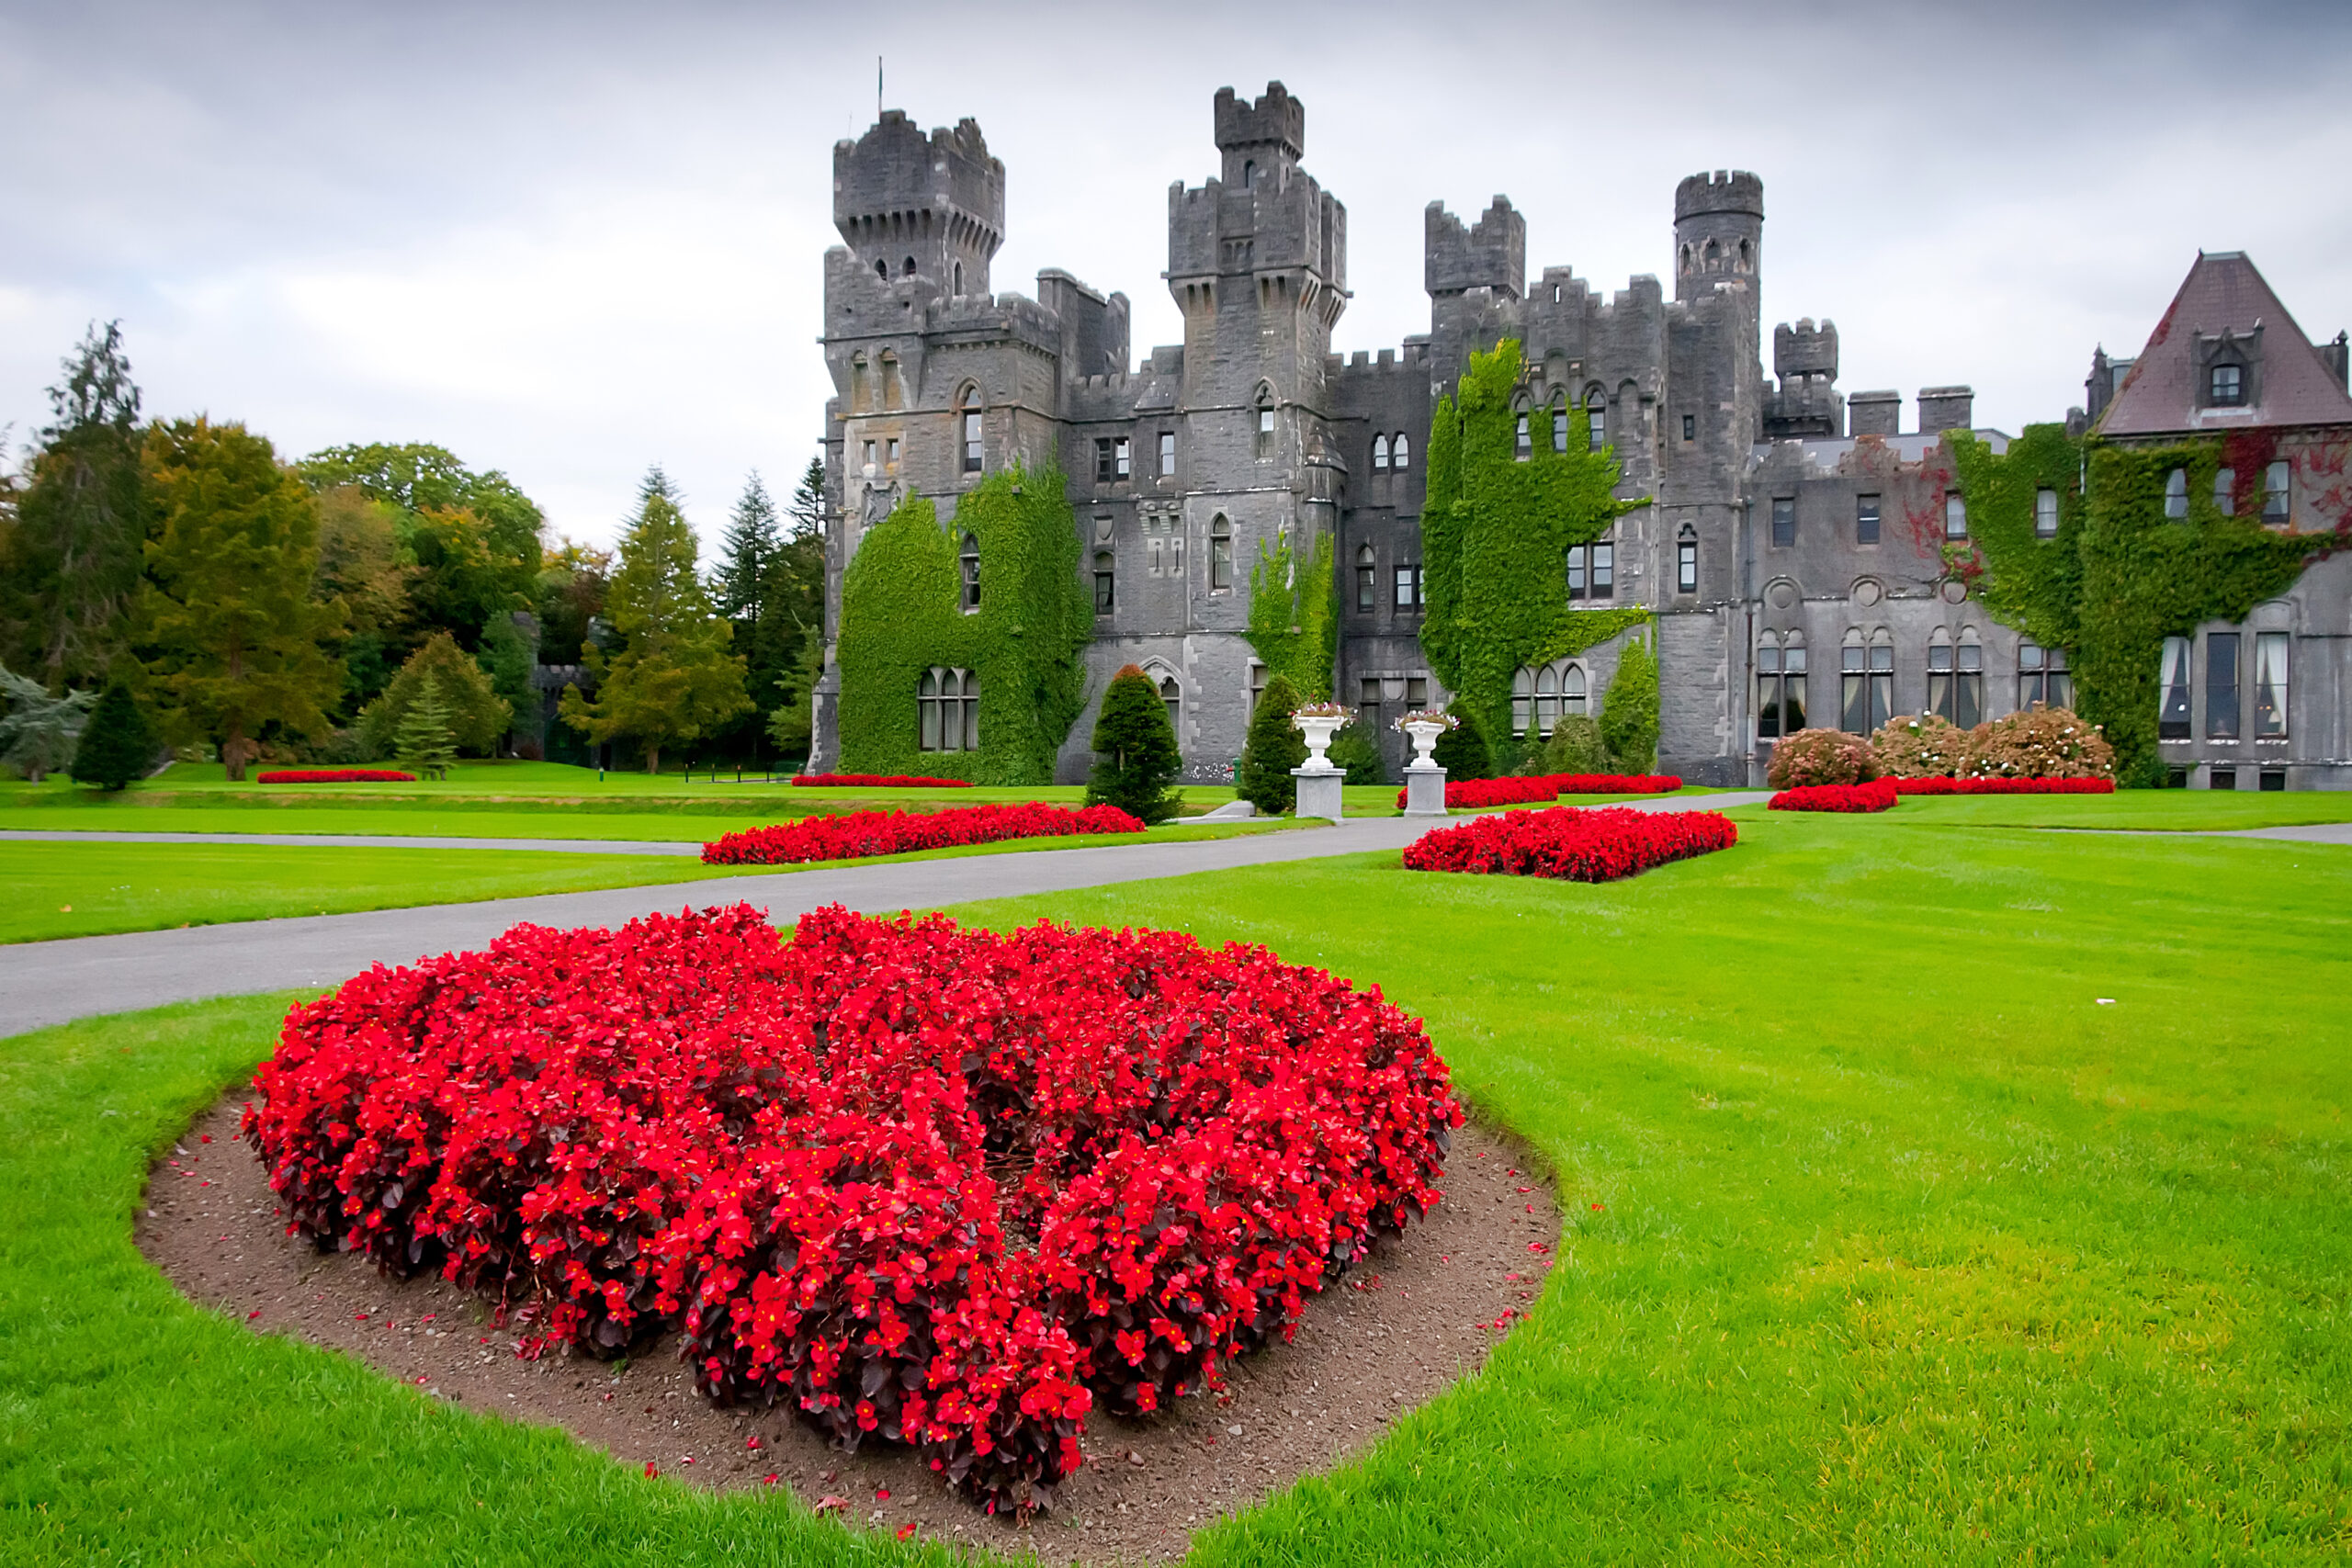 View of striking landscaping in front of an ivy colored grey castle with many square and round gothic turrets. 